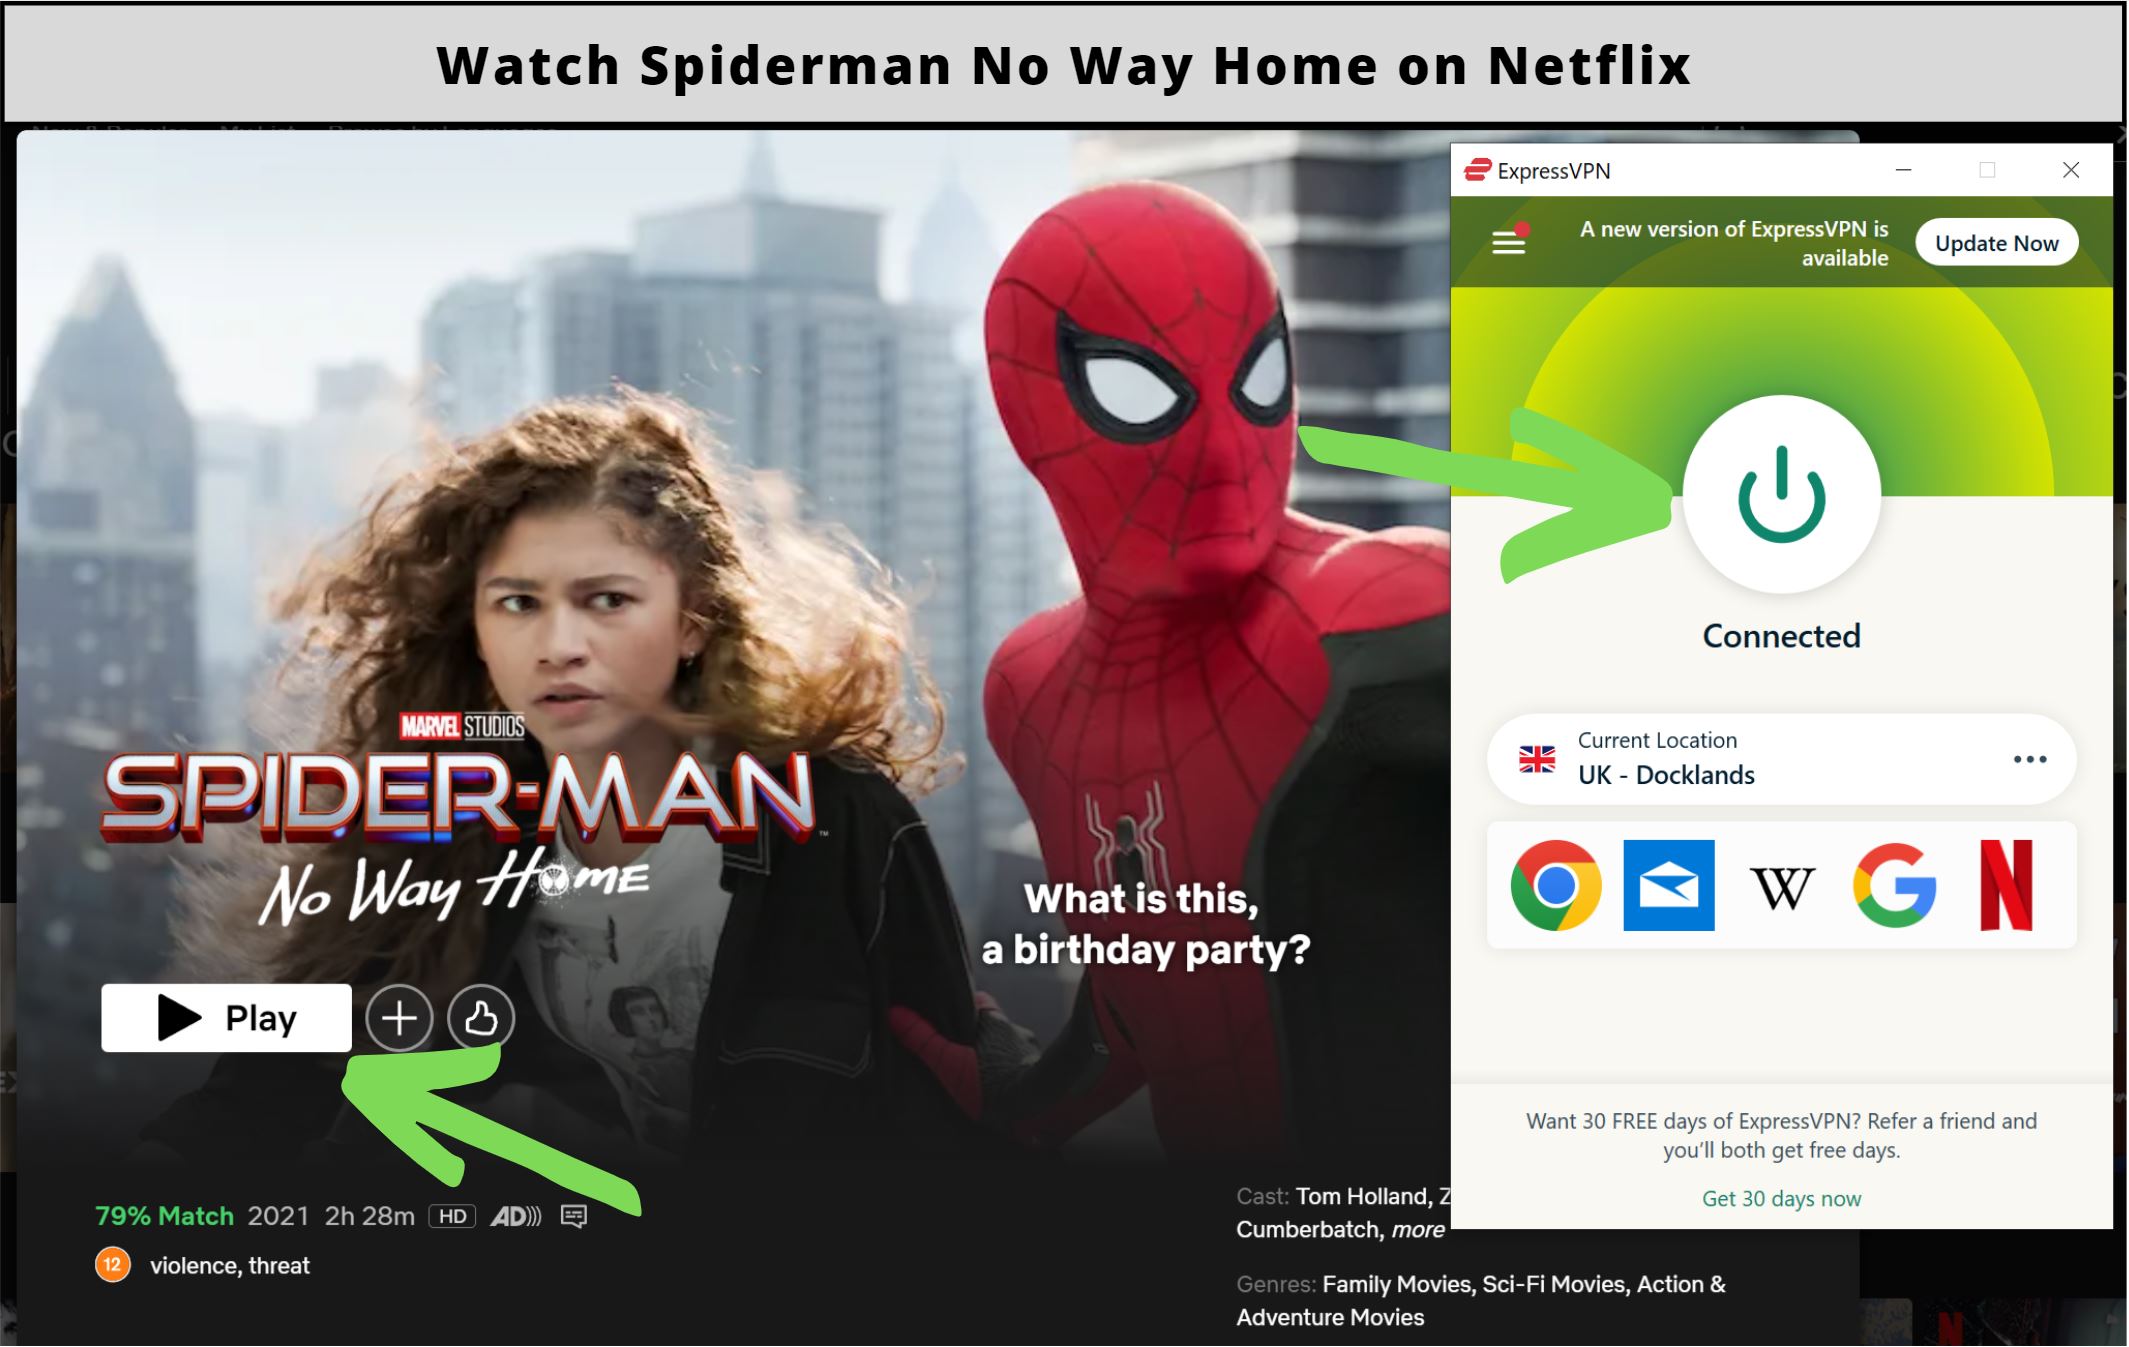 How to watch Spider-Man: No Way Home on Netflix?